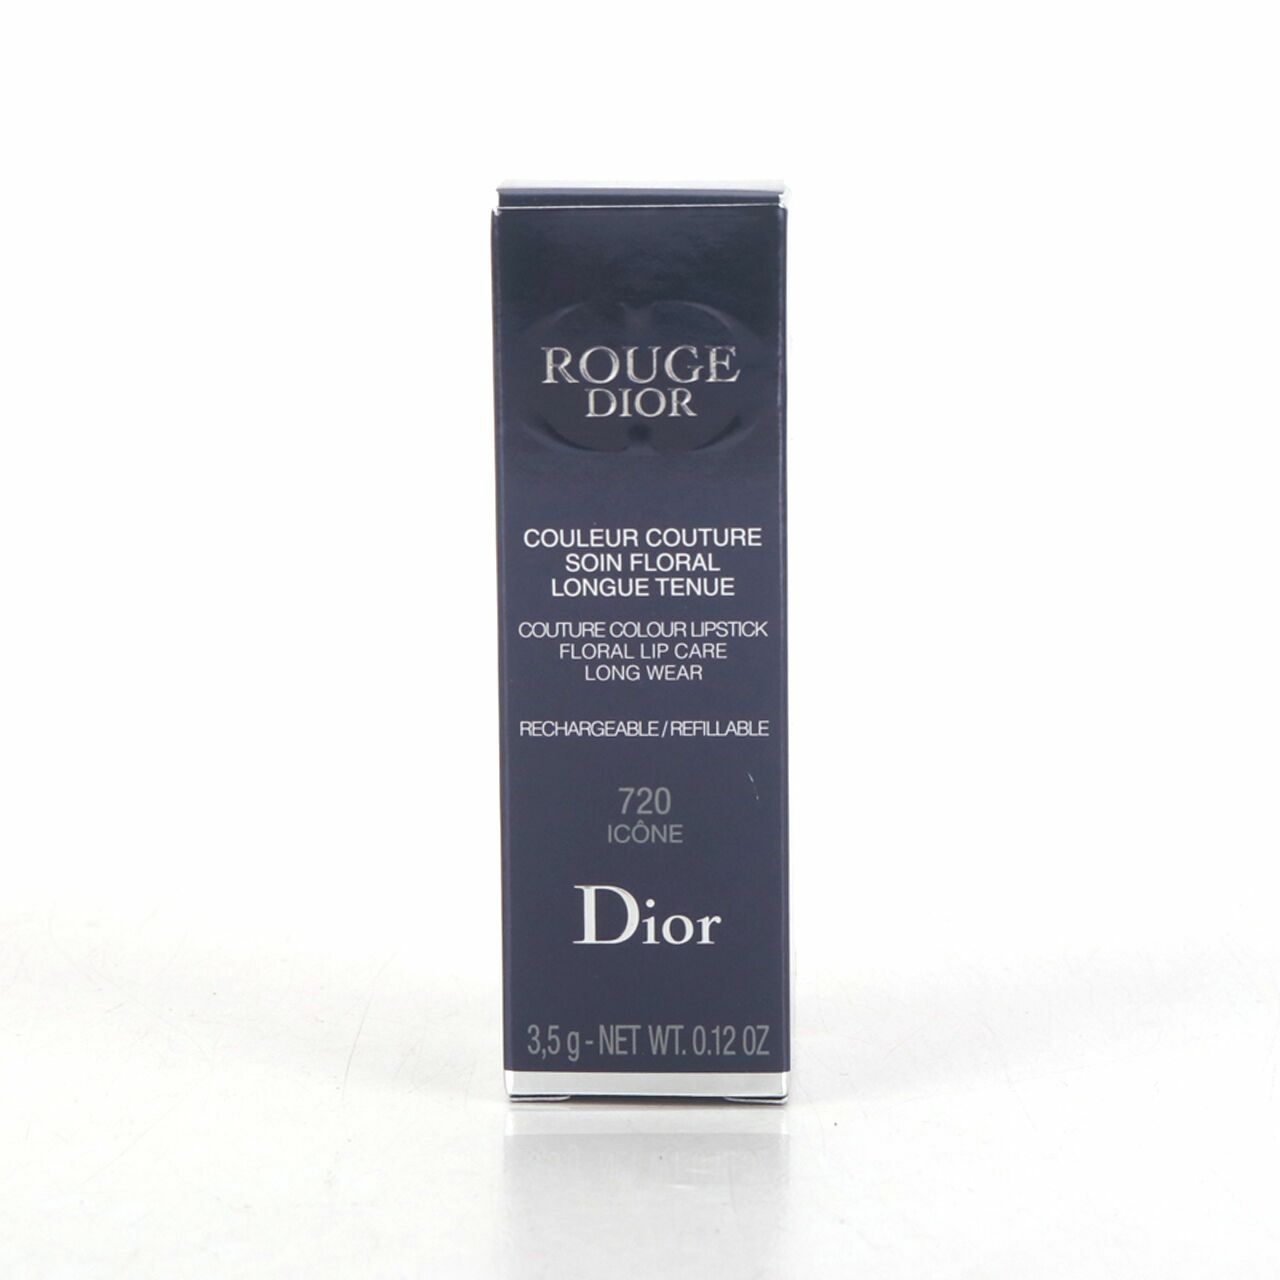 Christian Dior Rouge Dior 720 Icone Lips